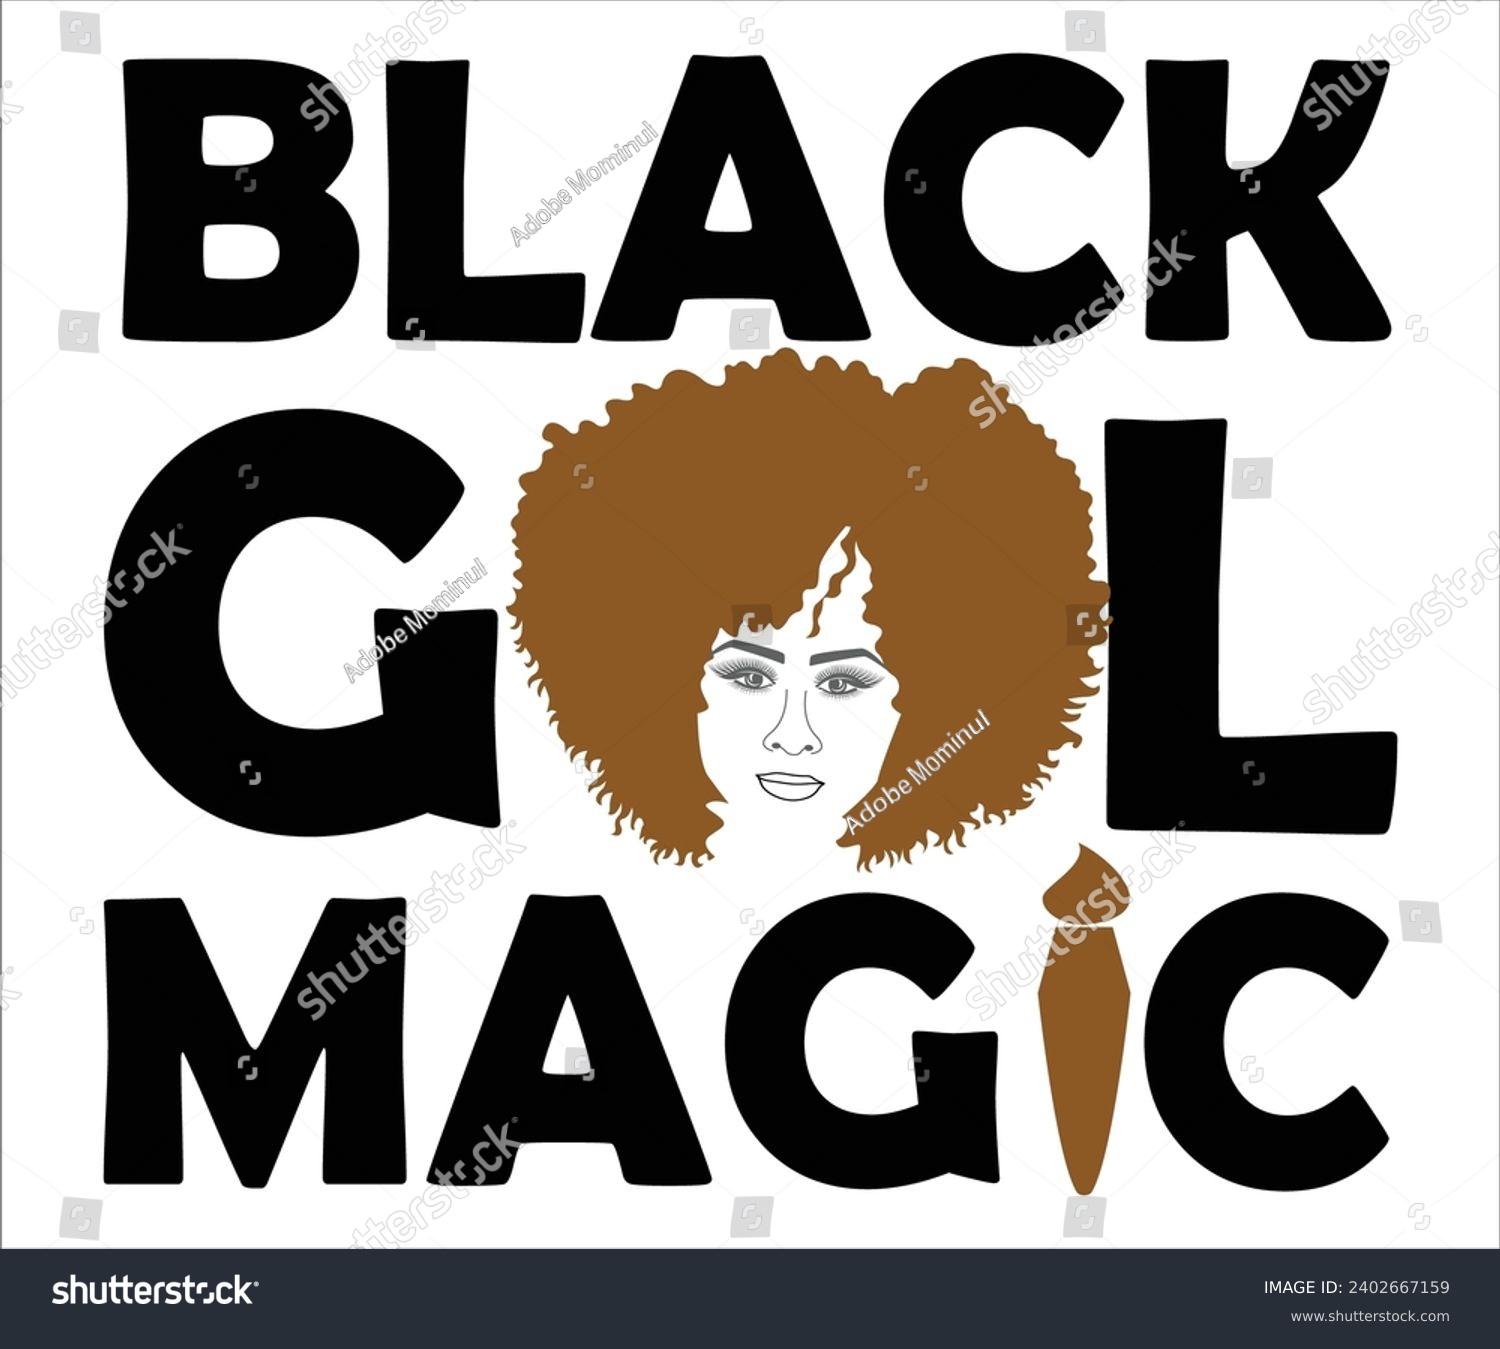 SVG of Black Girl magic Svg,Black History Month Svg,Retro,Juneteenth Svg,Black History Quotes,Black People Afro American T shirt,BLM Svg,Black Men Woman,In February in United States and Canada,Cut file svg